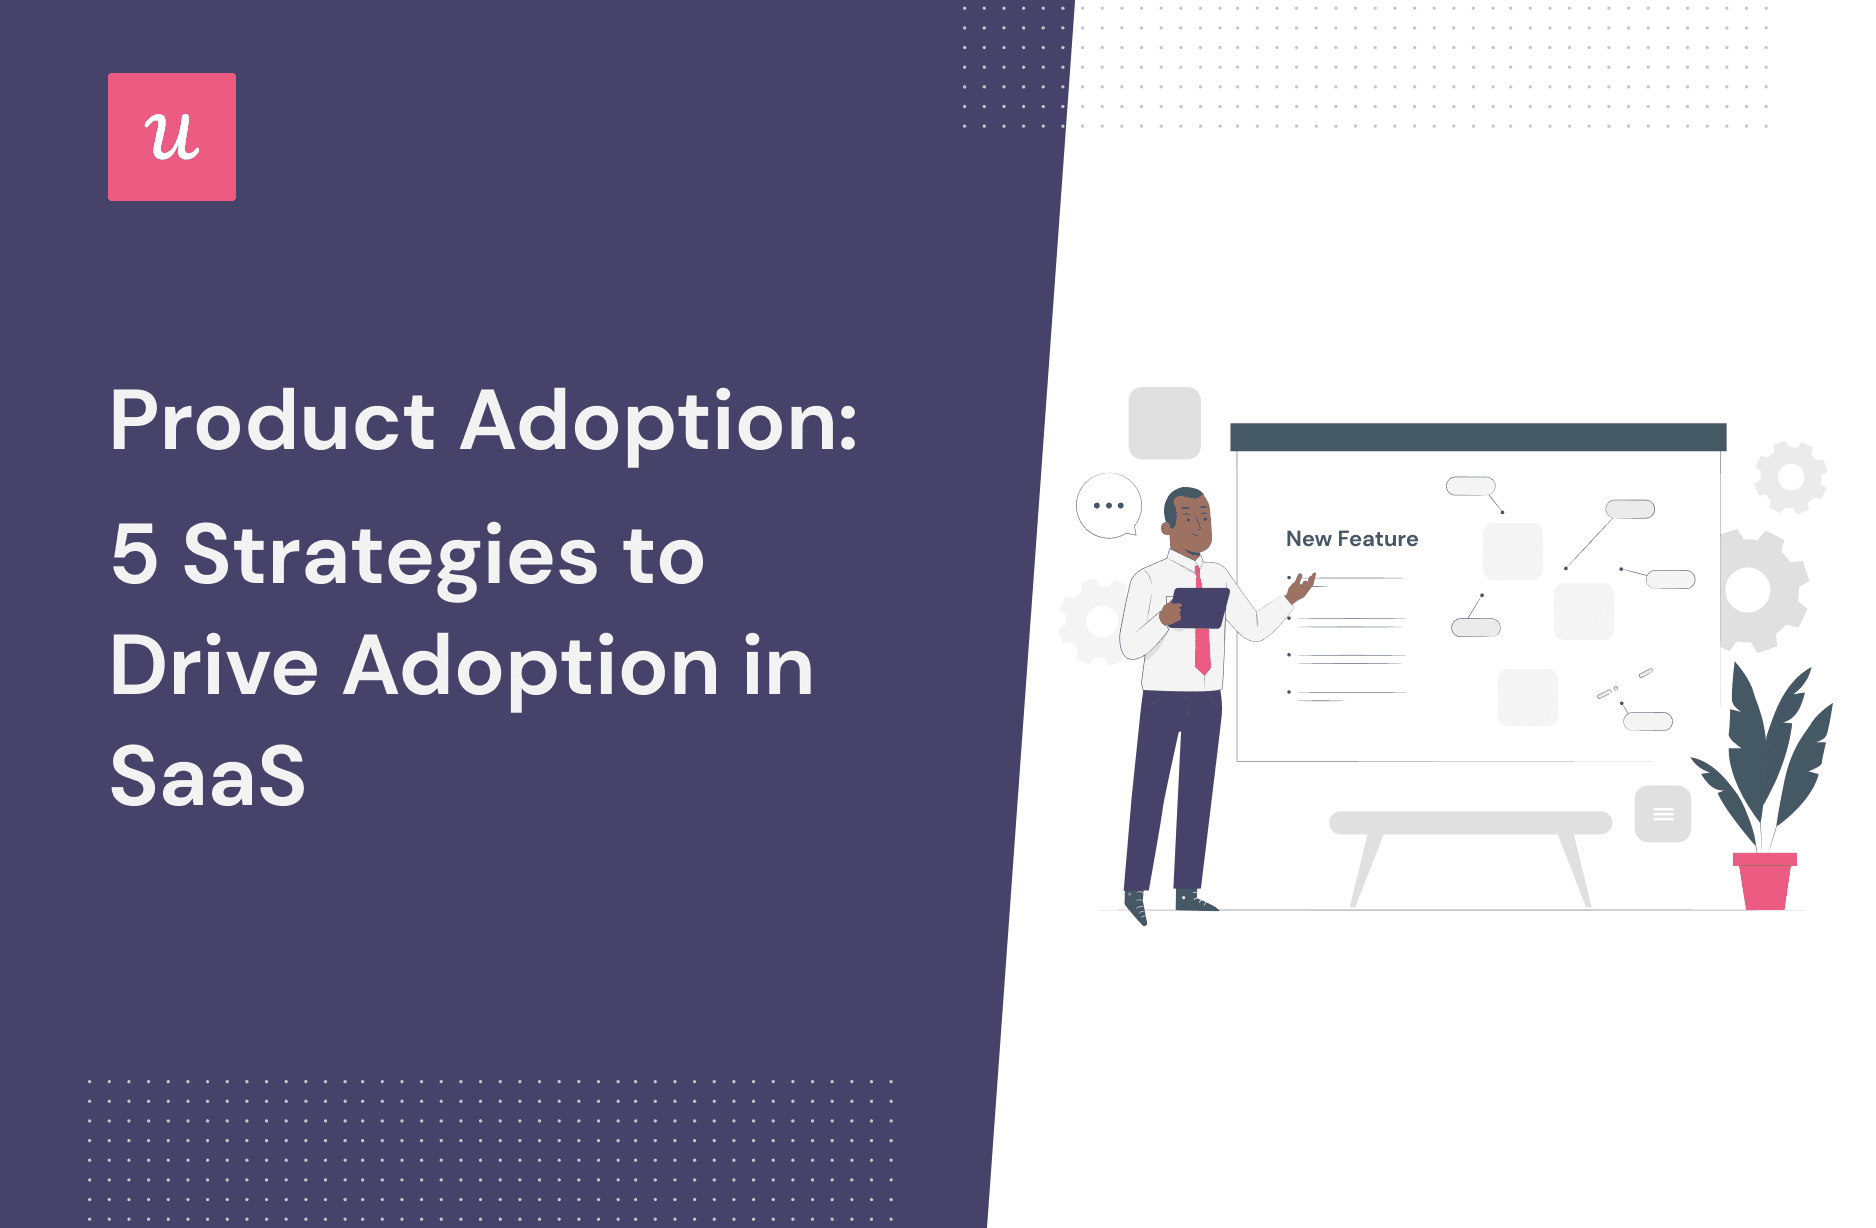 Product Adoption: 5 Strategies To Drive Adoption in SaaS